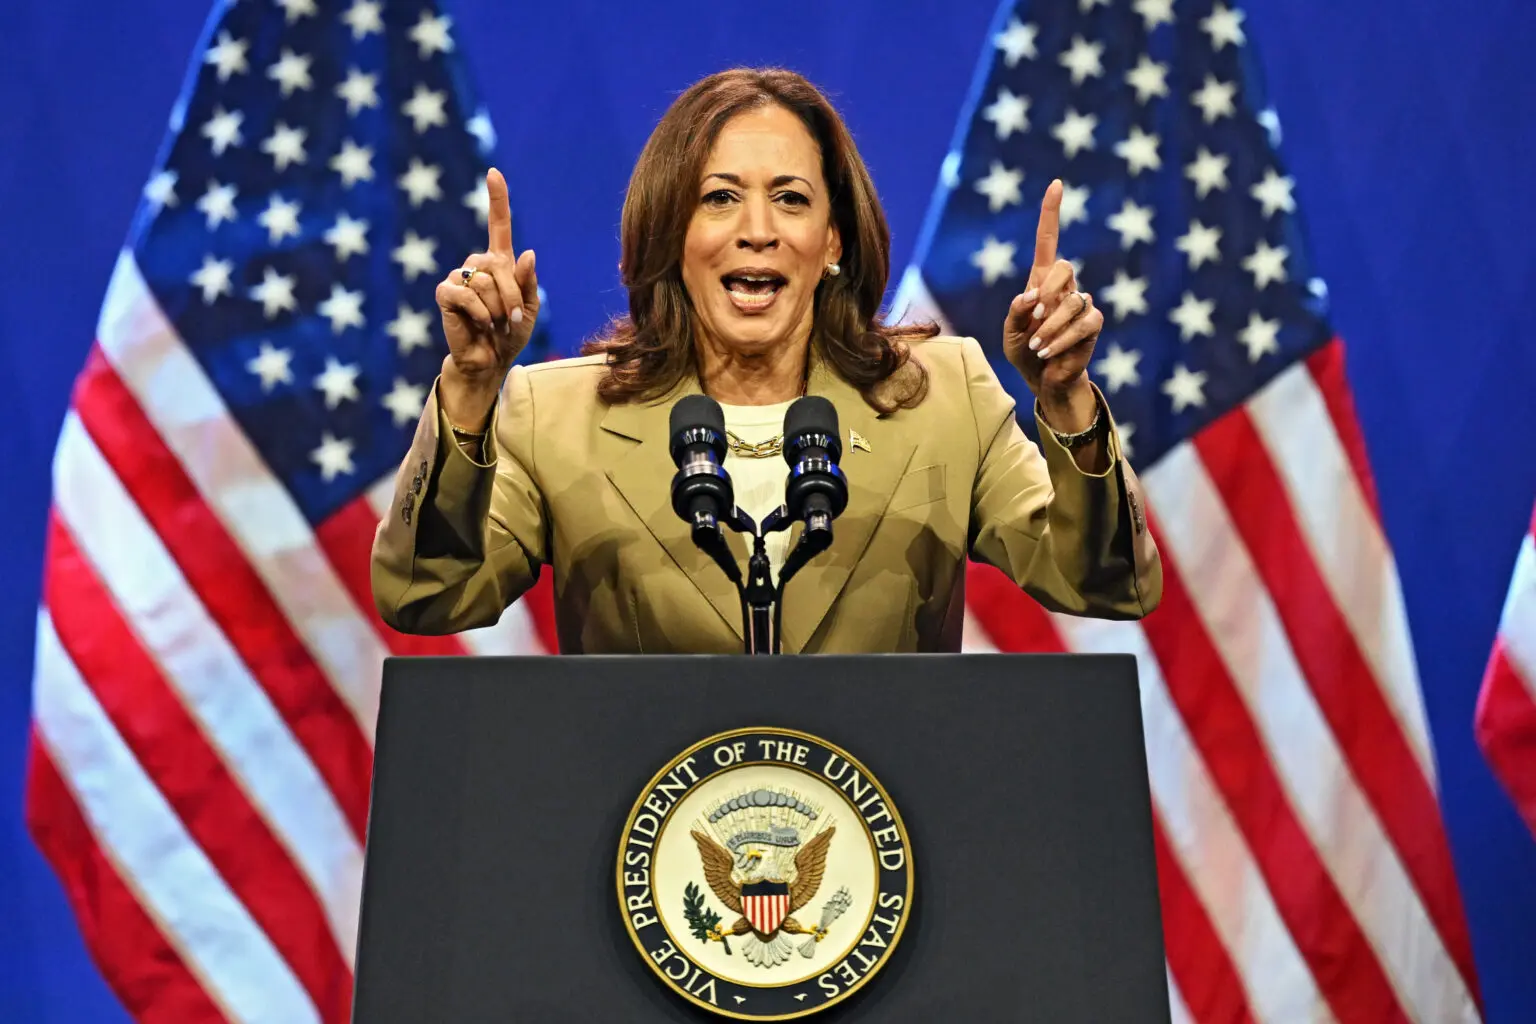 US election: Kamala Harris leads Trump in new poll after Biden’s exit